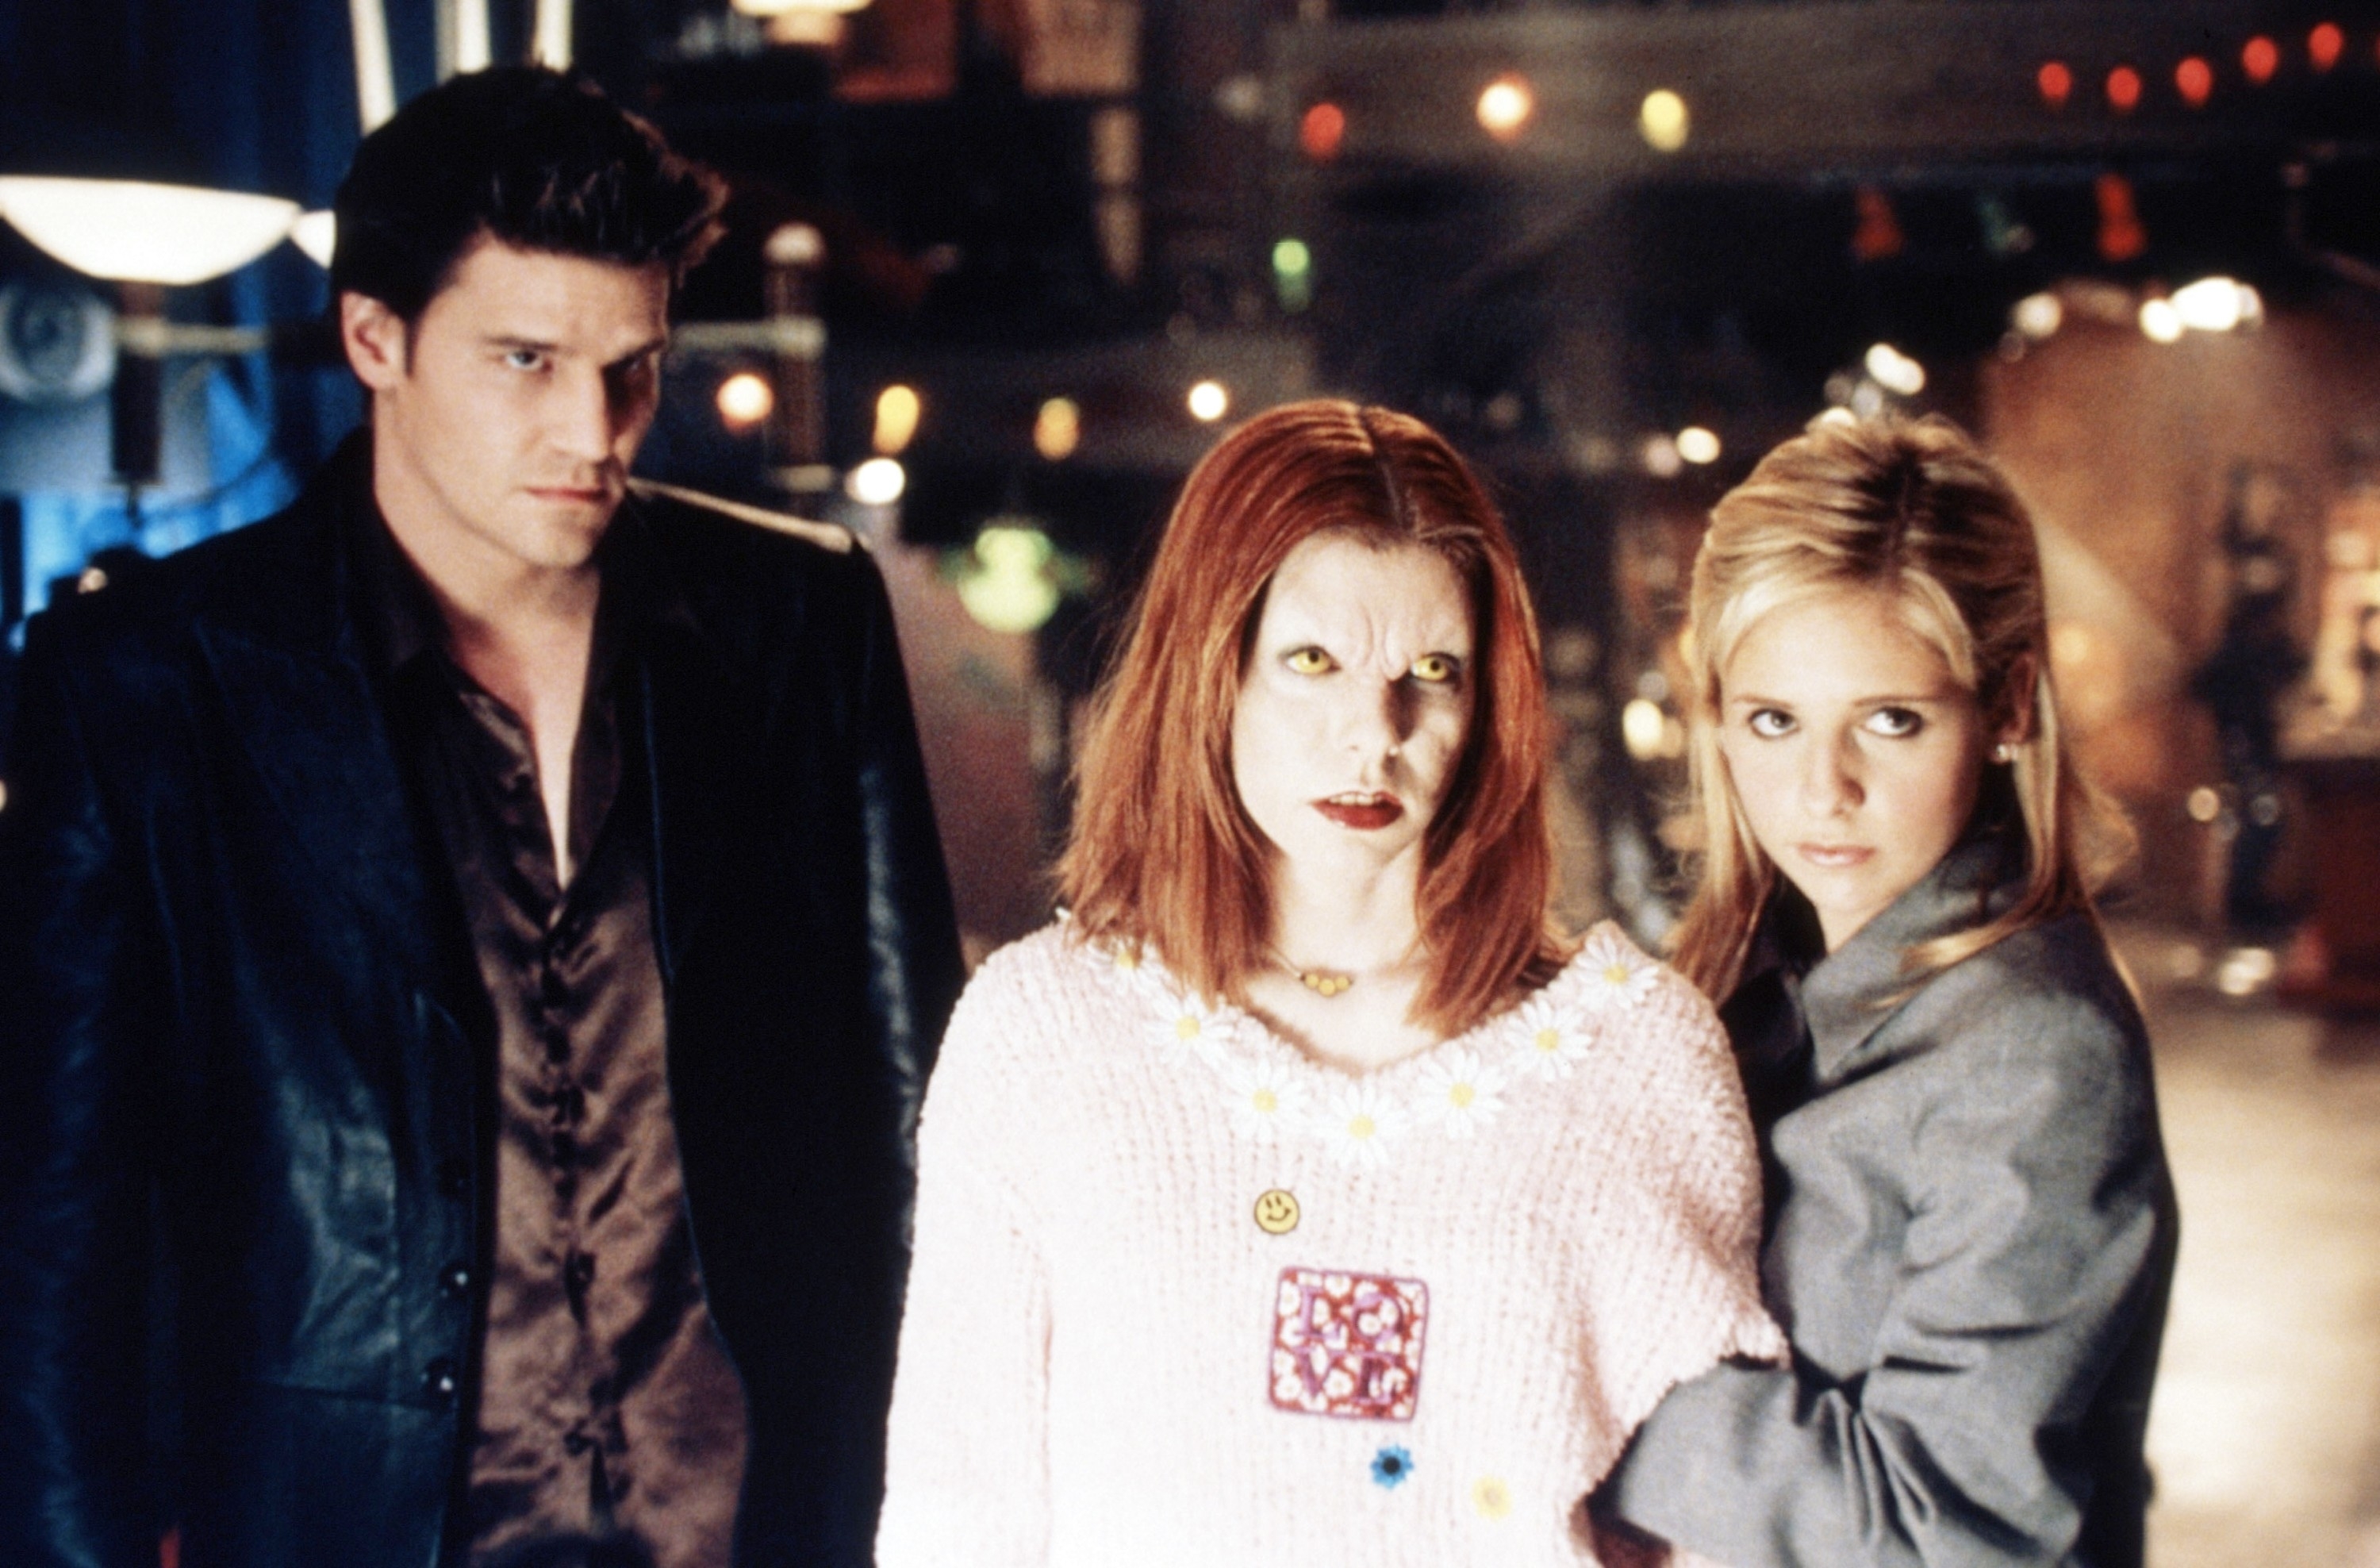 Three characters from Buffy the Vampire Slayer standing together; one male on the left, two females on the right